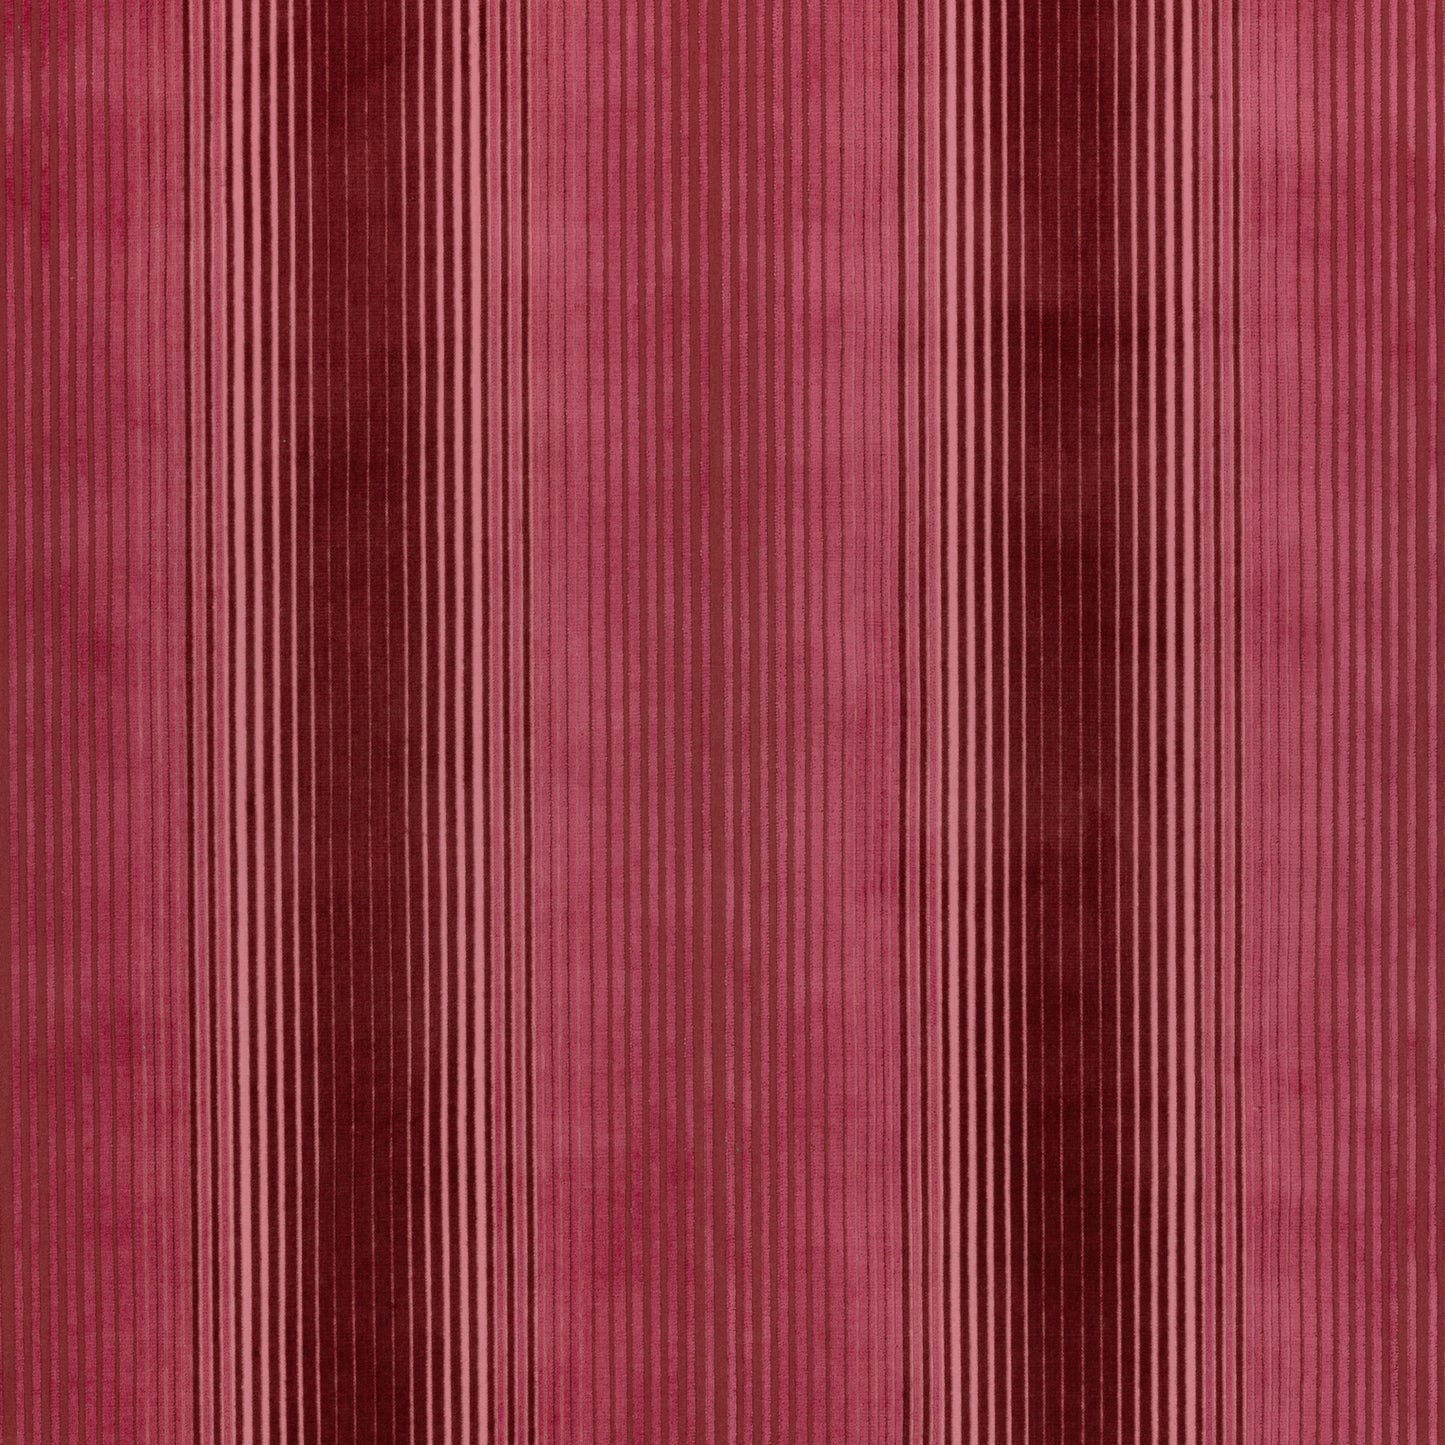 Purchase  Ann French Fabric Product AW9667  pattern name  Ombre Velvet